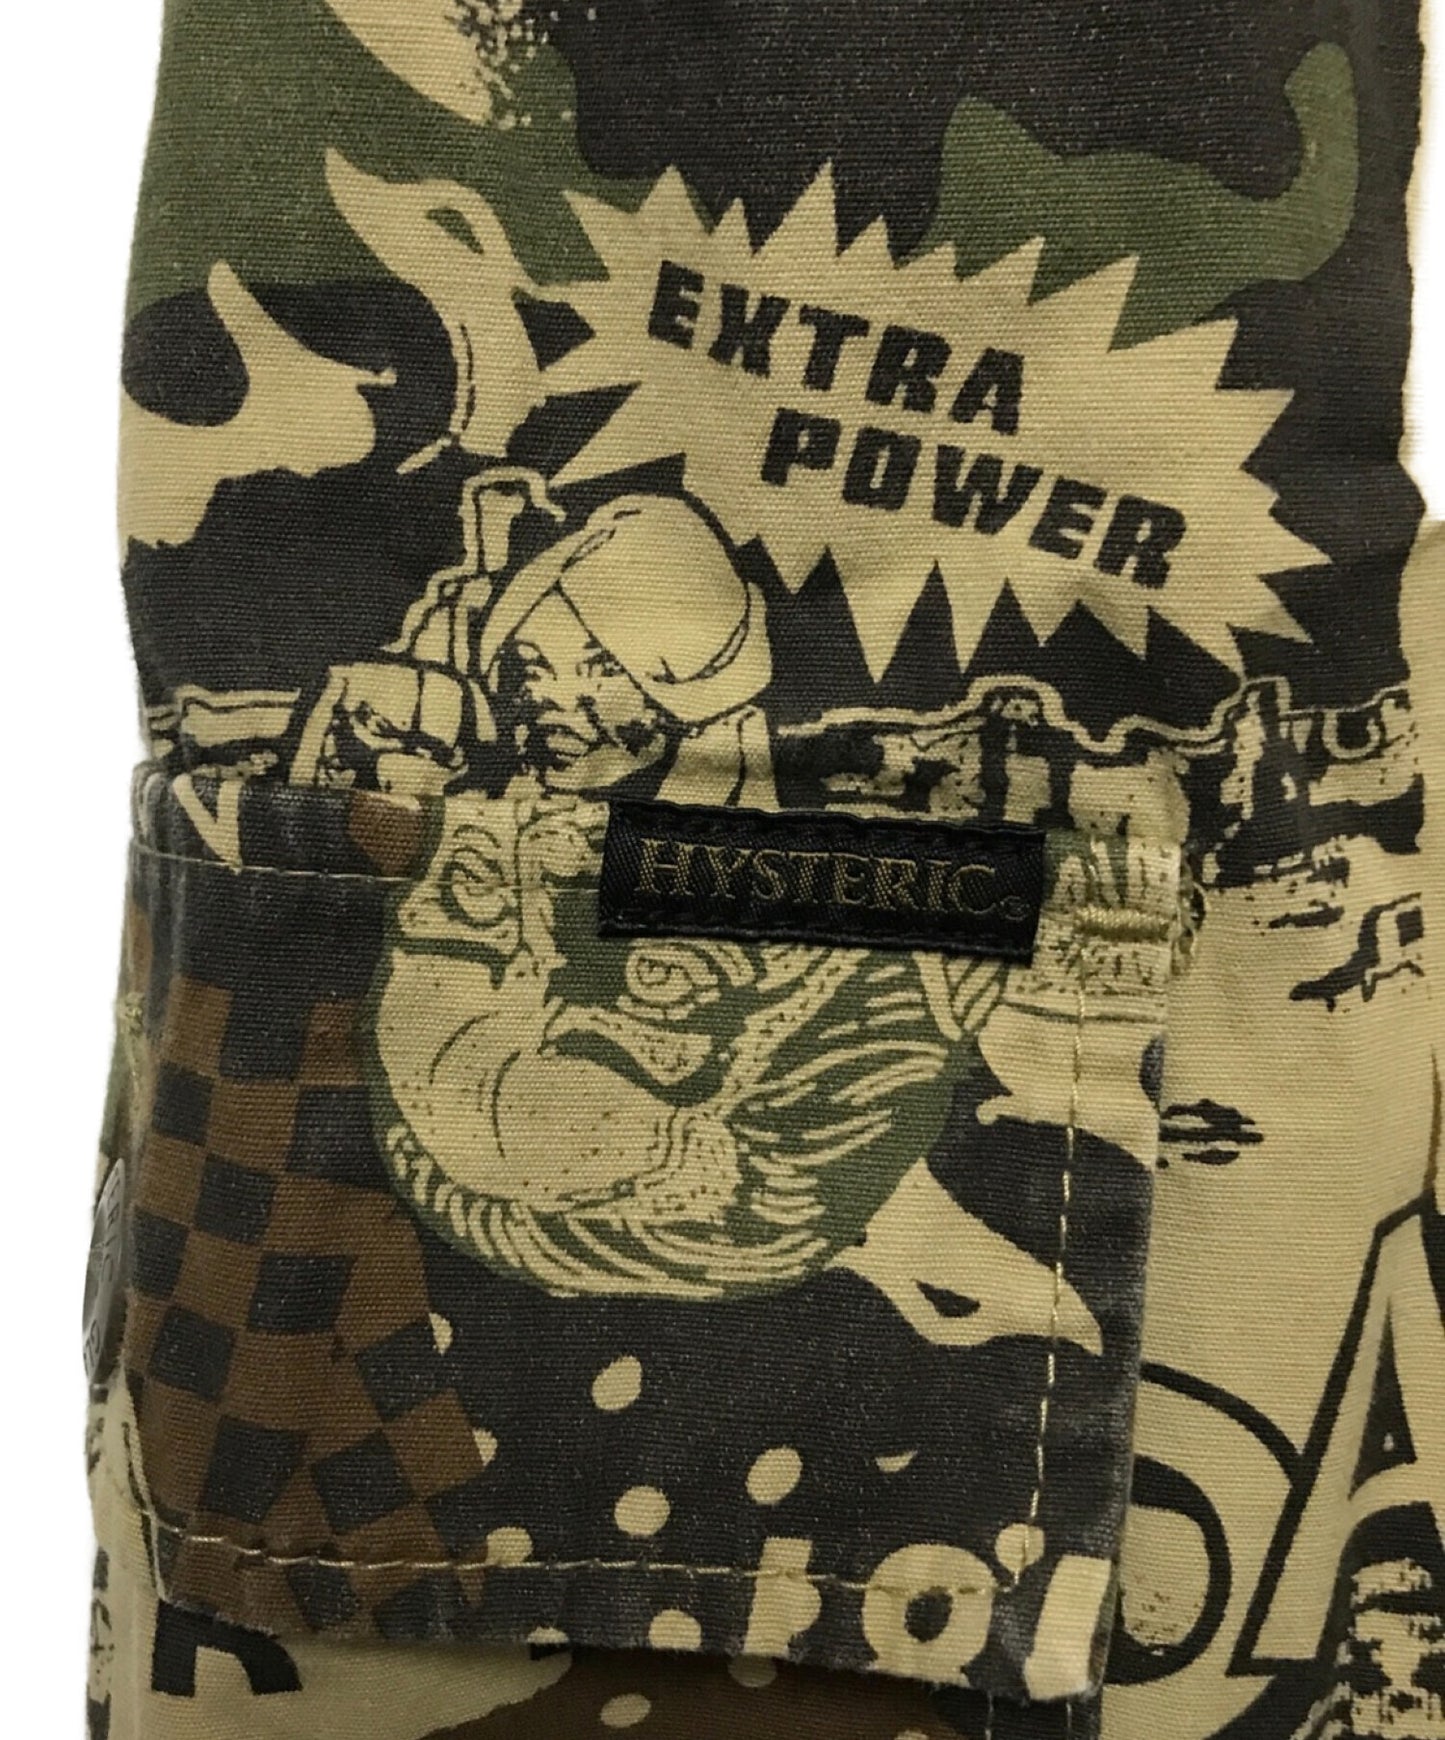 [Pre-owned] Hysteric Glamour Wide cargo pants with all-over pattern